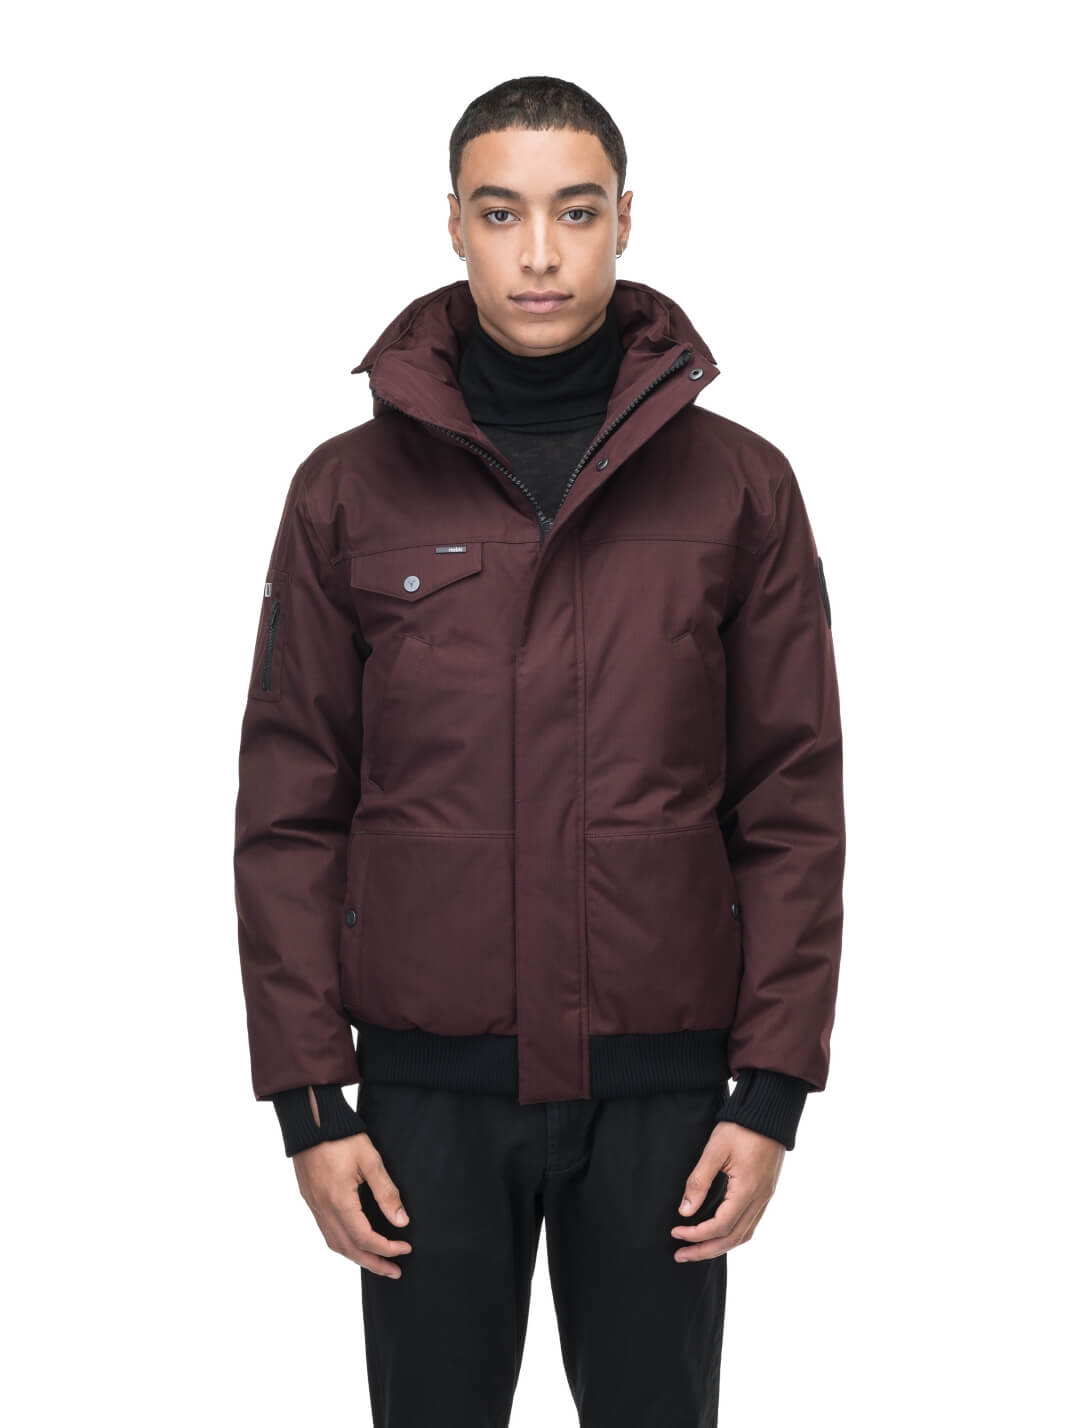 Men's sleek down filled bomber jacket with clean details and a fur free hood in Merlot